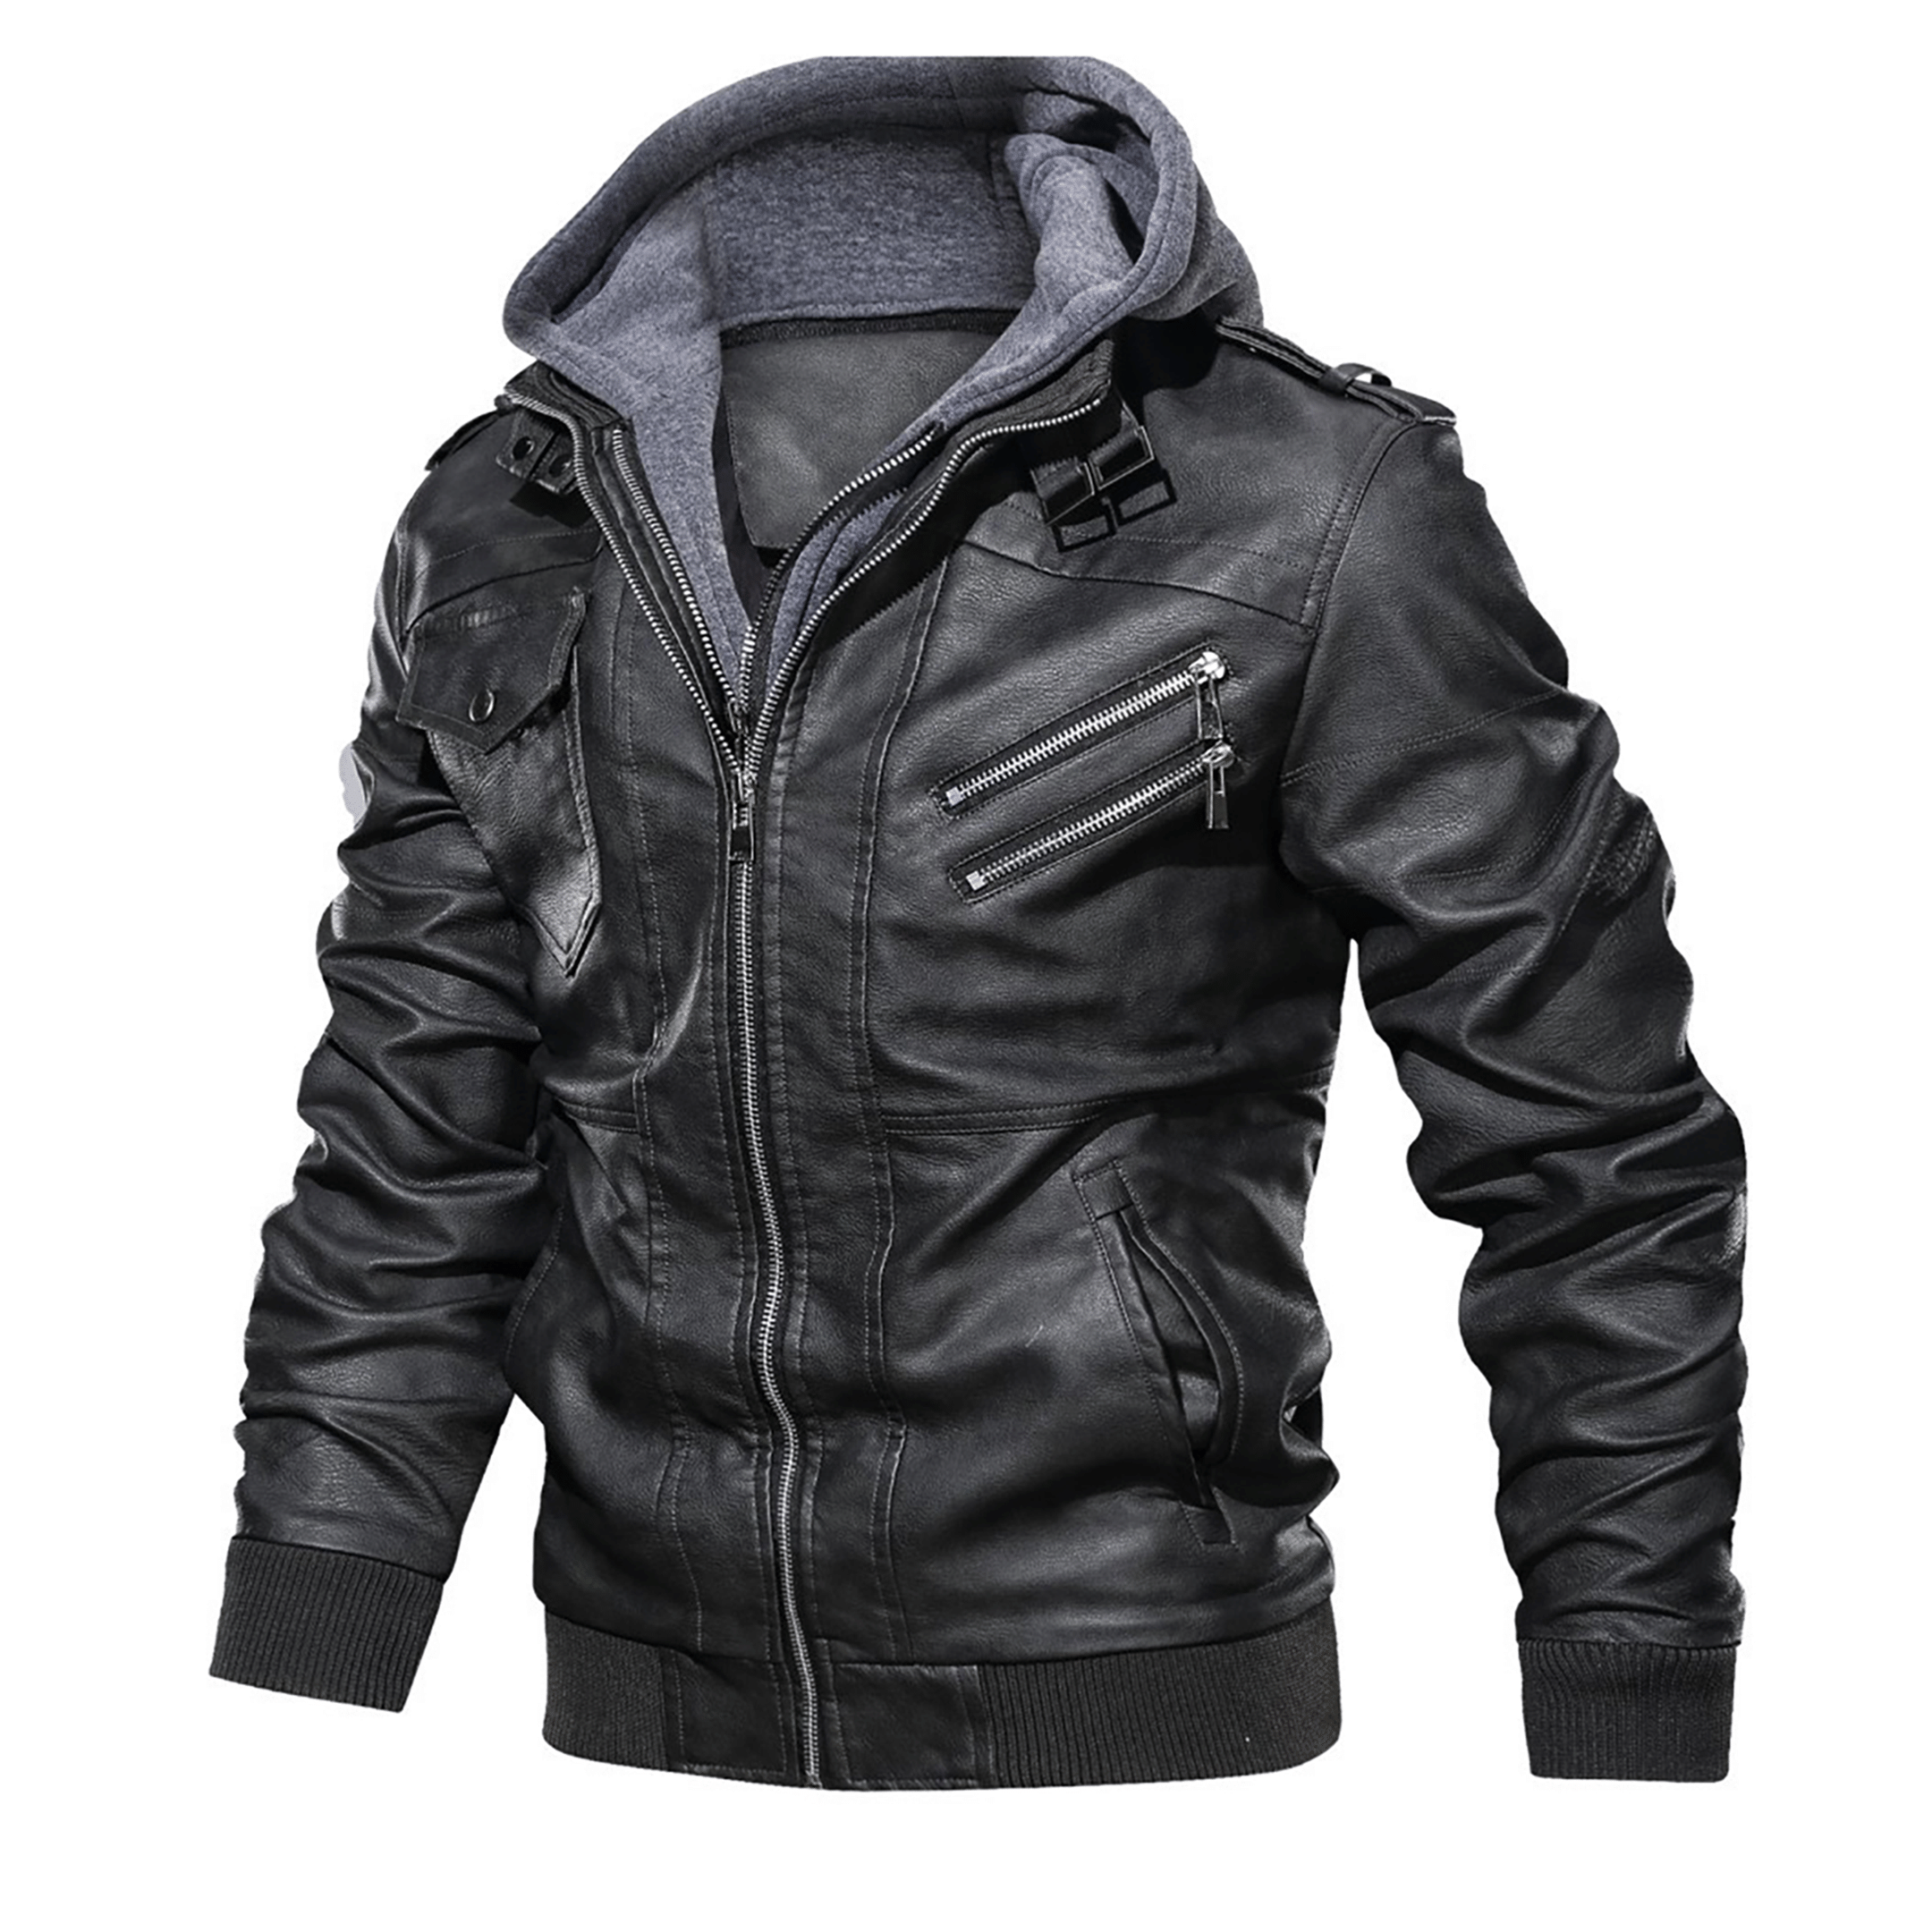 Top leather jackets and latest products 123